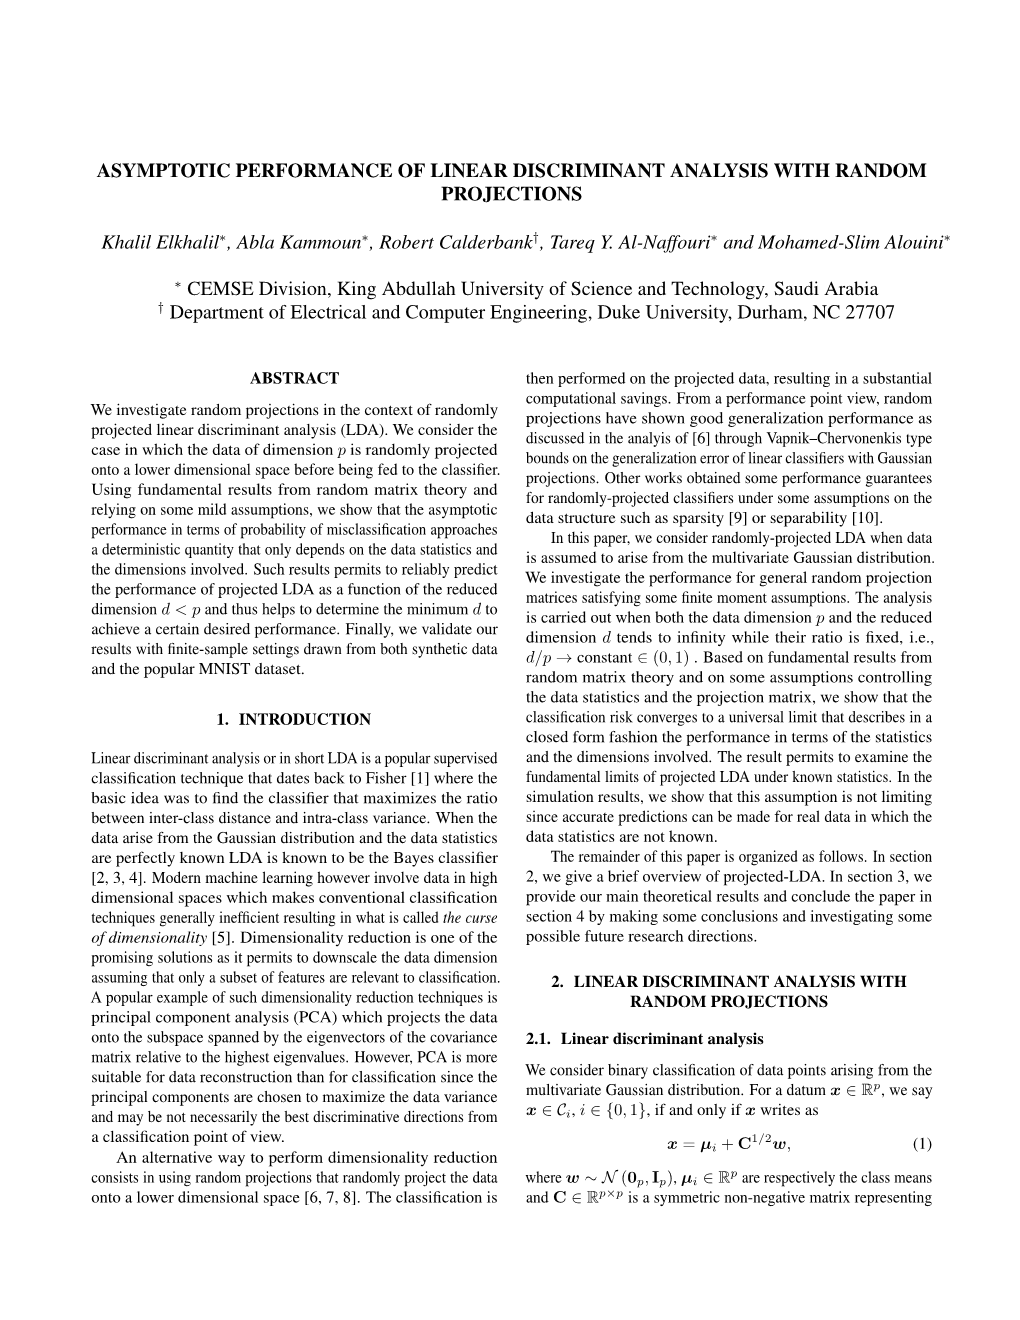 Asymptotic Performance of Linear Discriminant Analysis with Random Projections